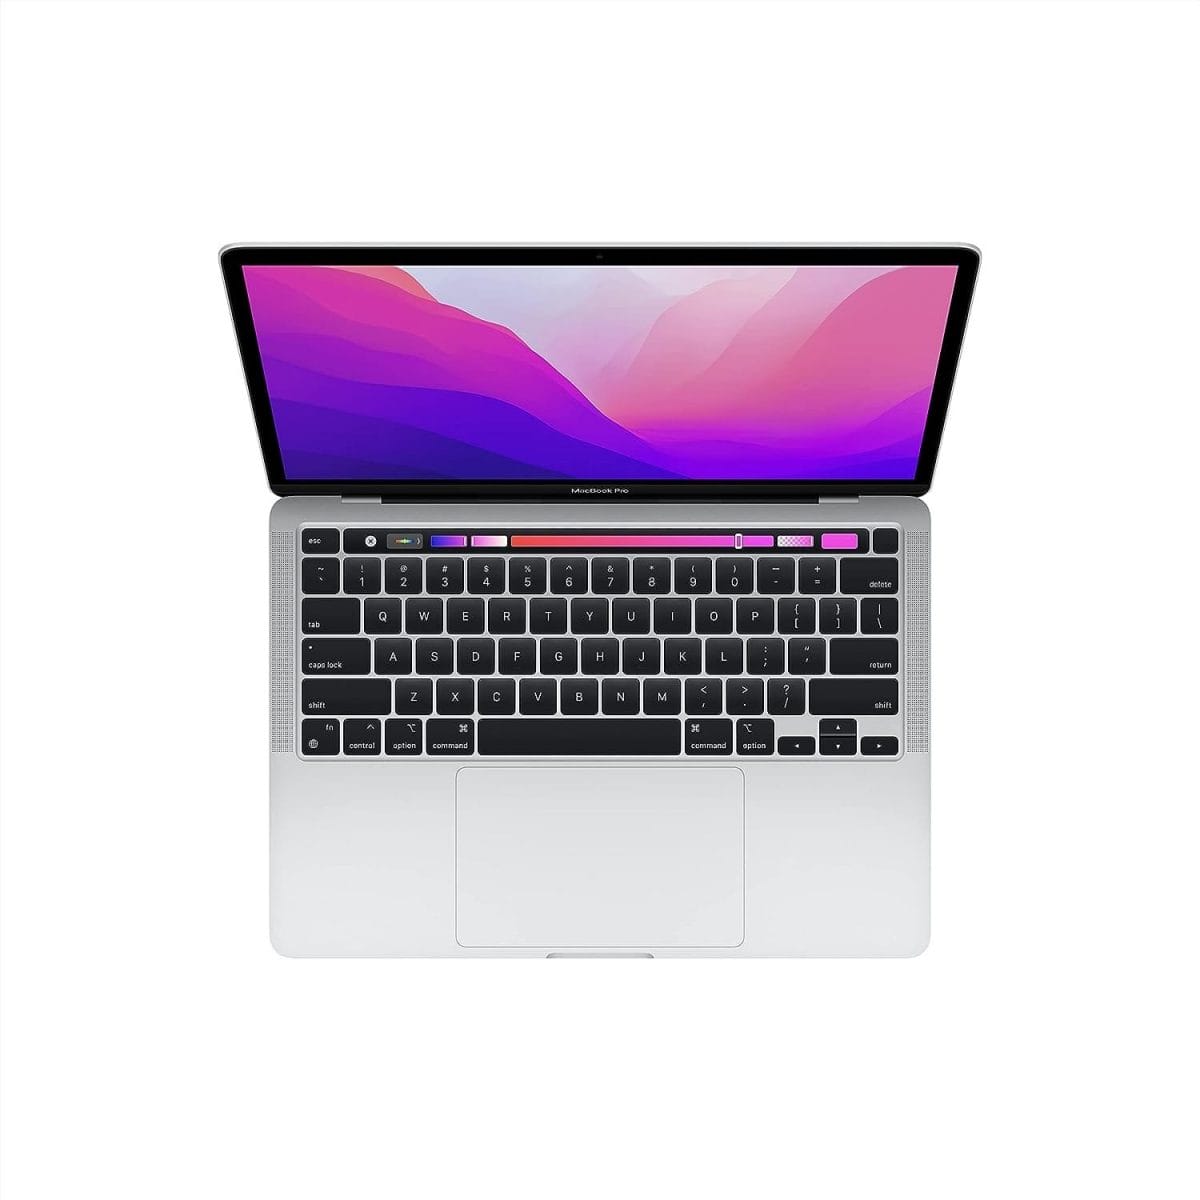 Apple 2022 MacBook Pro Laptop with M2 chip: 13-inch Retina Display, 8GB RAM, 256GB ​​​​​​​SSD ​​​​​​​Storage, Touch Bar, Backlit Keyboard, FaceTime HD Camera. Works with iPhone and iPad; Space Gray